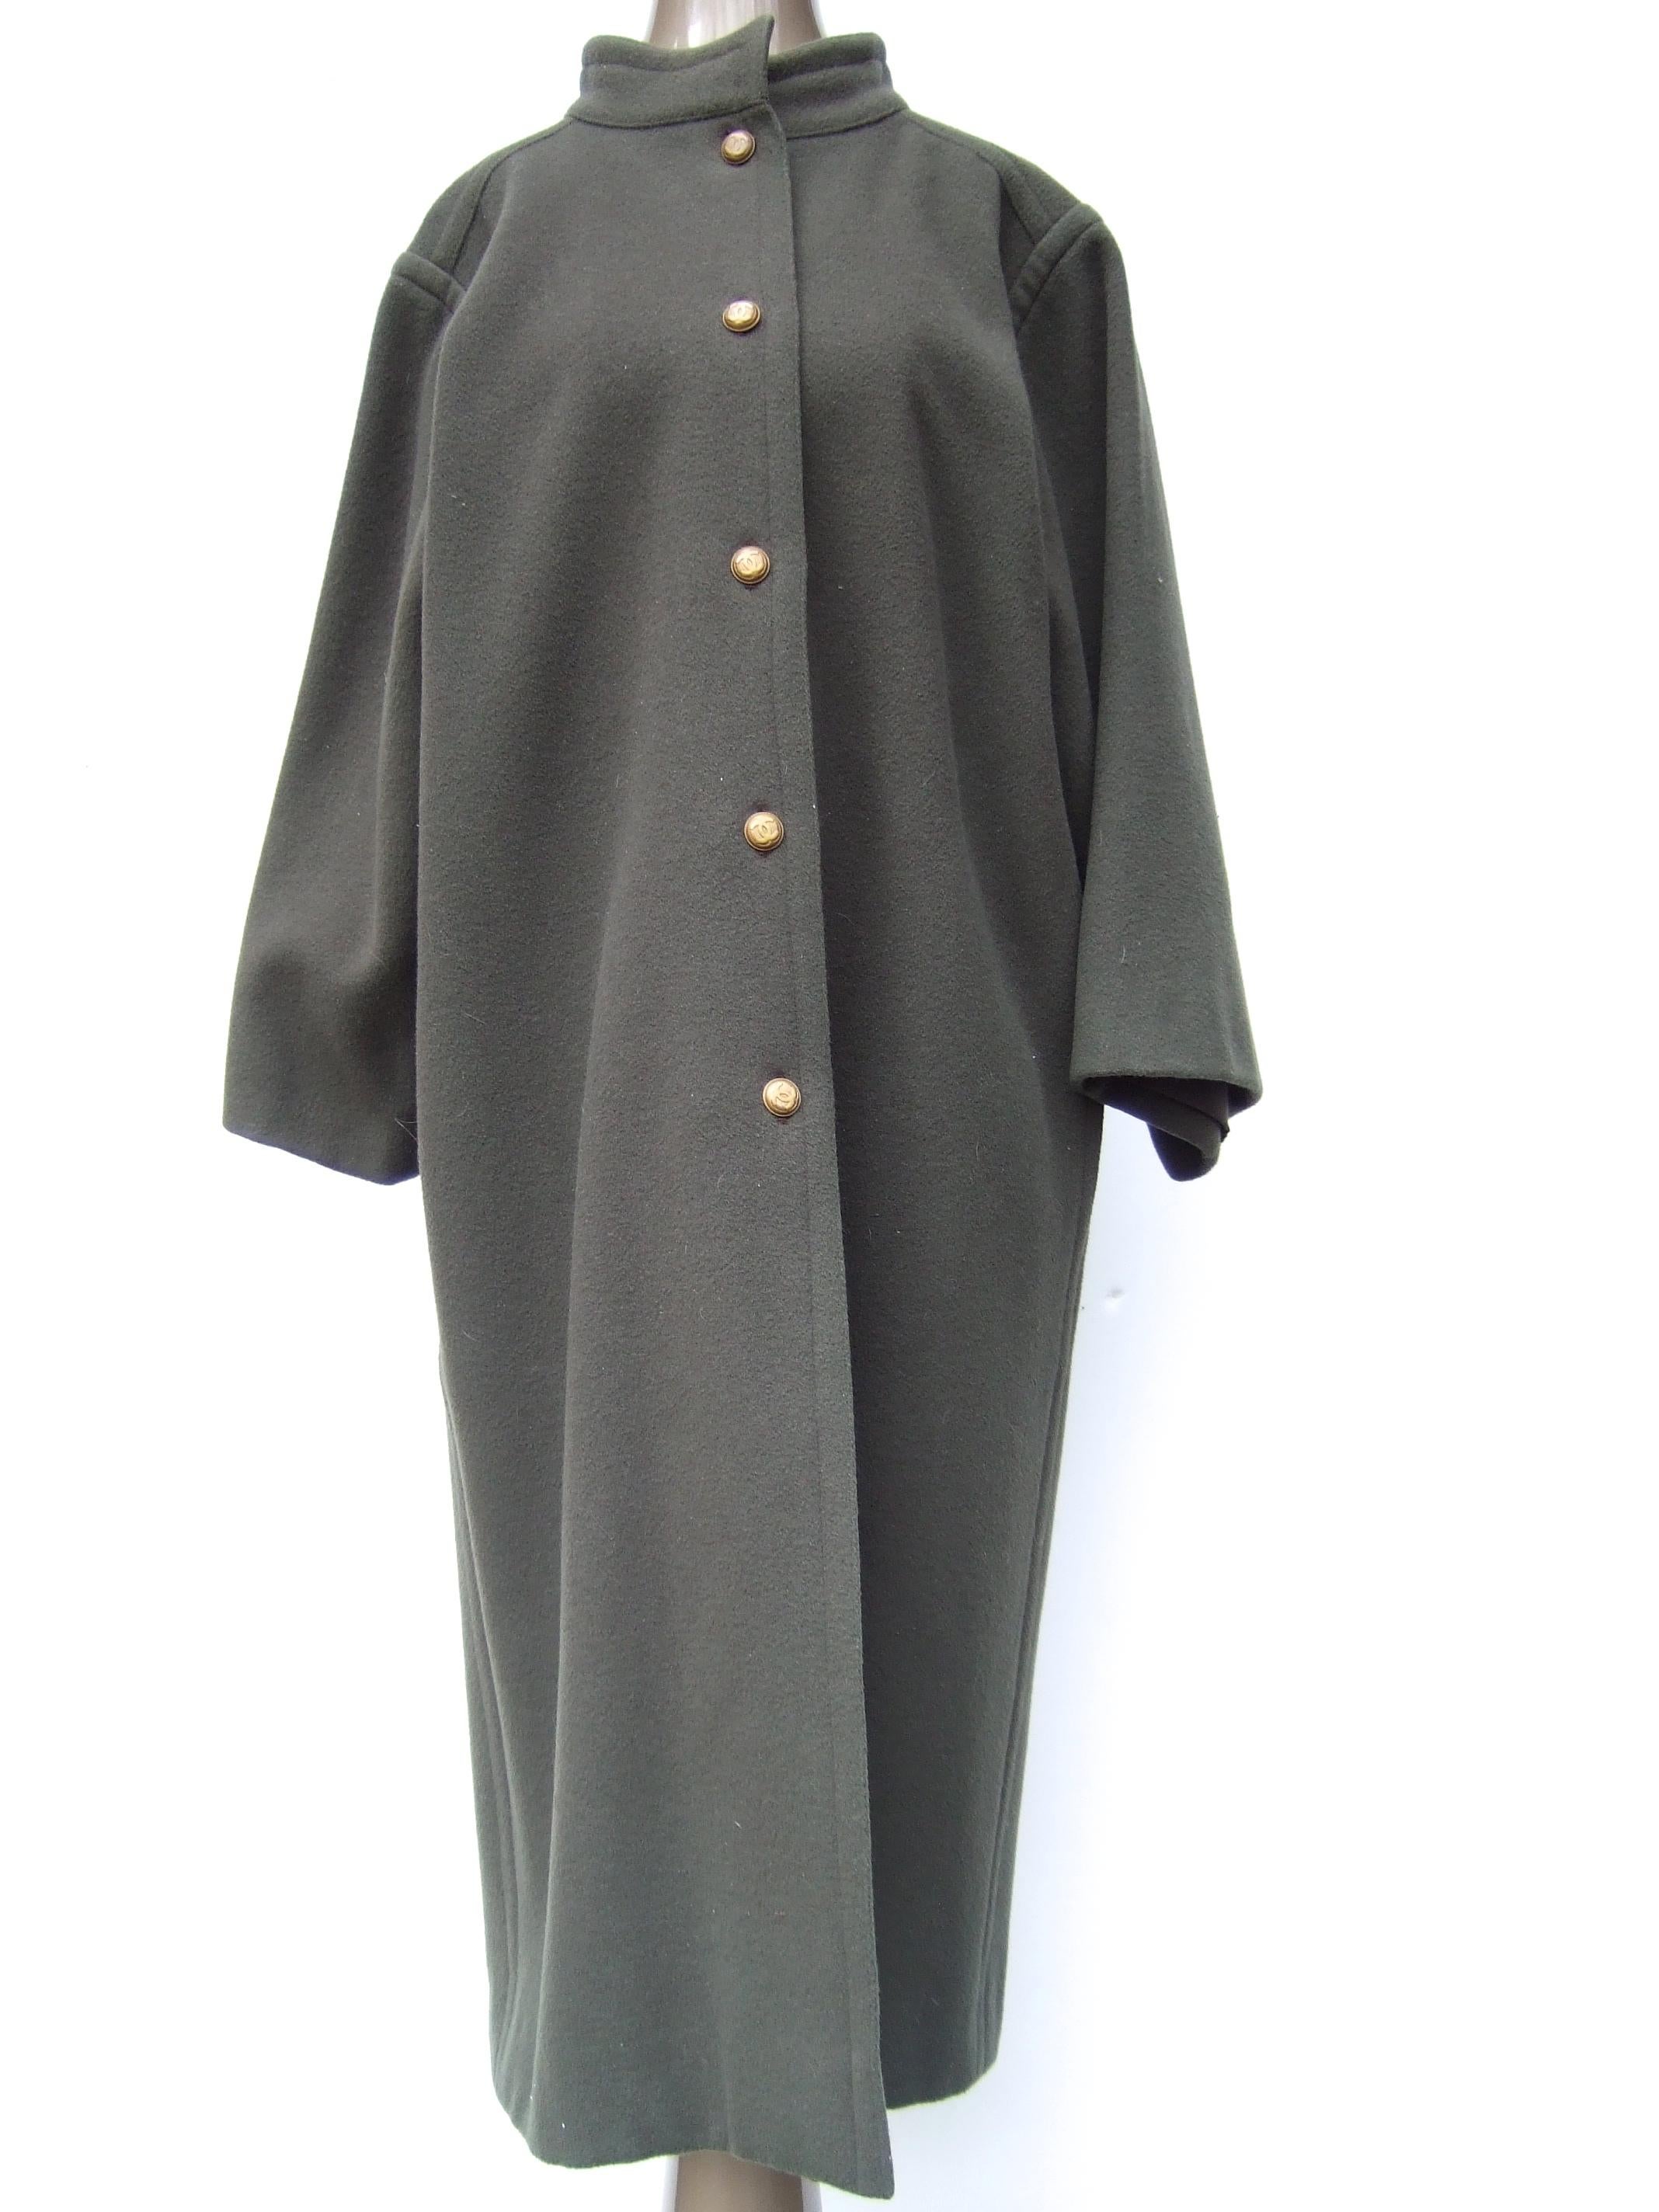 CHANEL Creations muted gray - green wool coat with C.C. buttons c 1980s
The stylish winter gauge wool coat is designed with a rounded stand-up collar
Adorned with five burnished brass metal buttons with Chanel's C.C. interlocked
 initials 

Designed